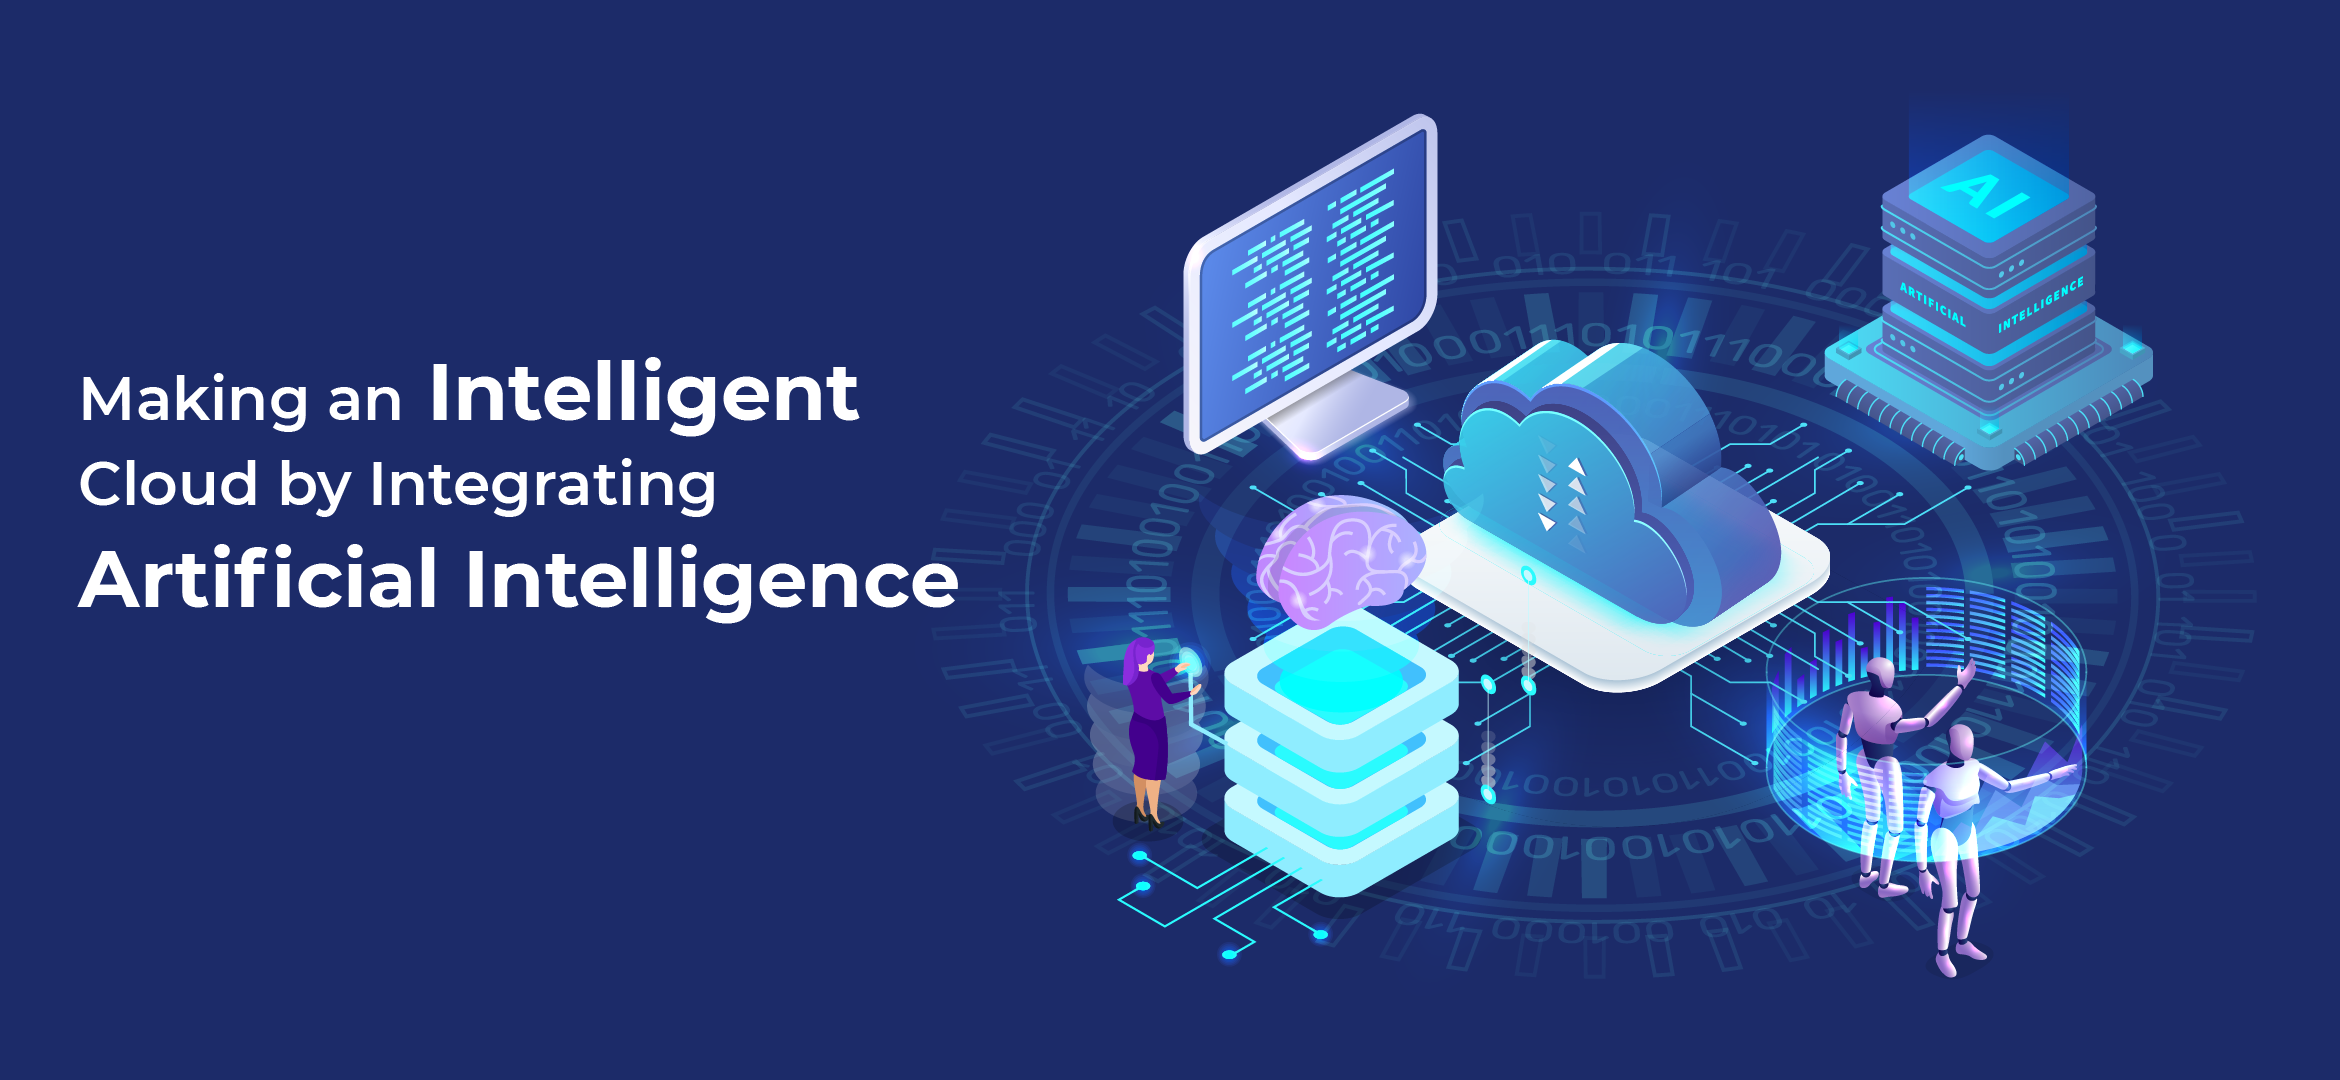 Making an Intelligent Cloud by Integrating Artificial Intelligence